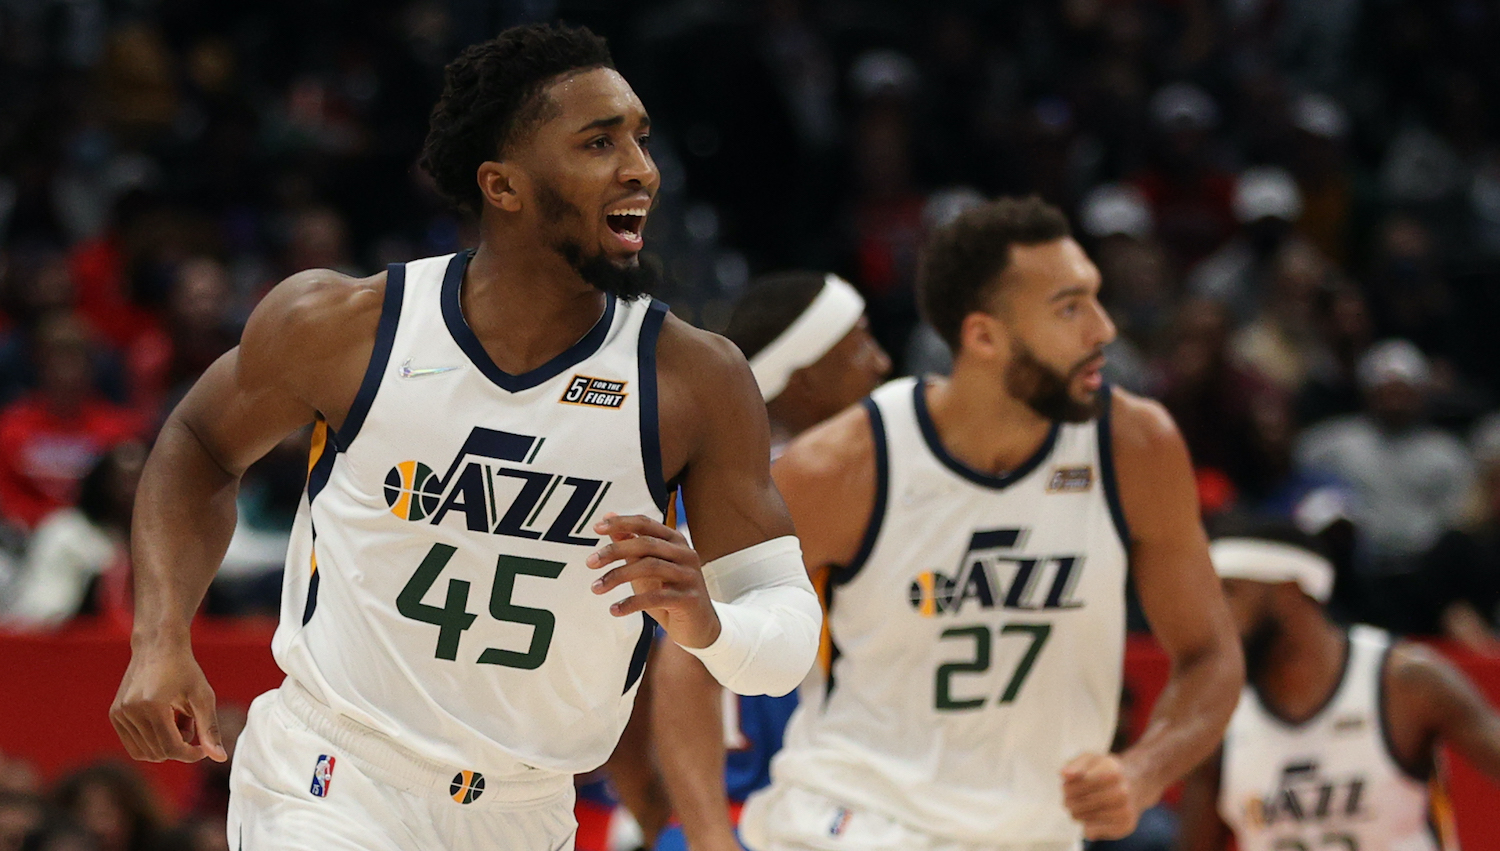 WASHINGTON, DC - DECEMBER 11: Donovan Mitchell #45 of the Utah Jazz reacts after scoring against the Washington Wizards during the first half at Capital One Arena on December 11, 2021 in Washington, DC. NOTE TO USER: User expressly acknowledges and agrees that, by downloading and or using this photograph, User is consenting to the terms and conditions of the Getty Images License Agreement. (Photo by Patrick Smith/Getty Images)